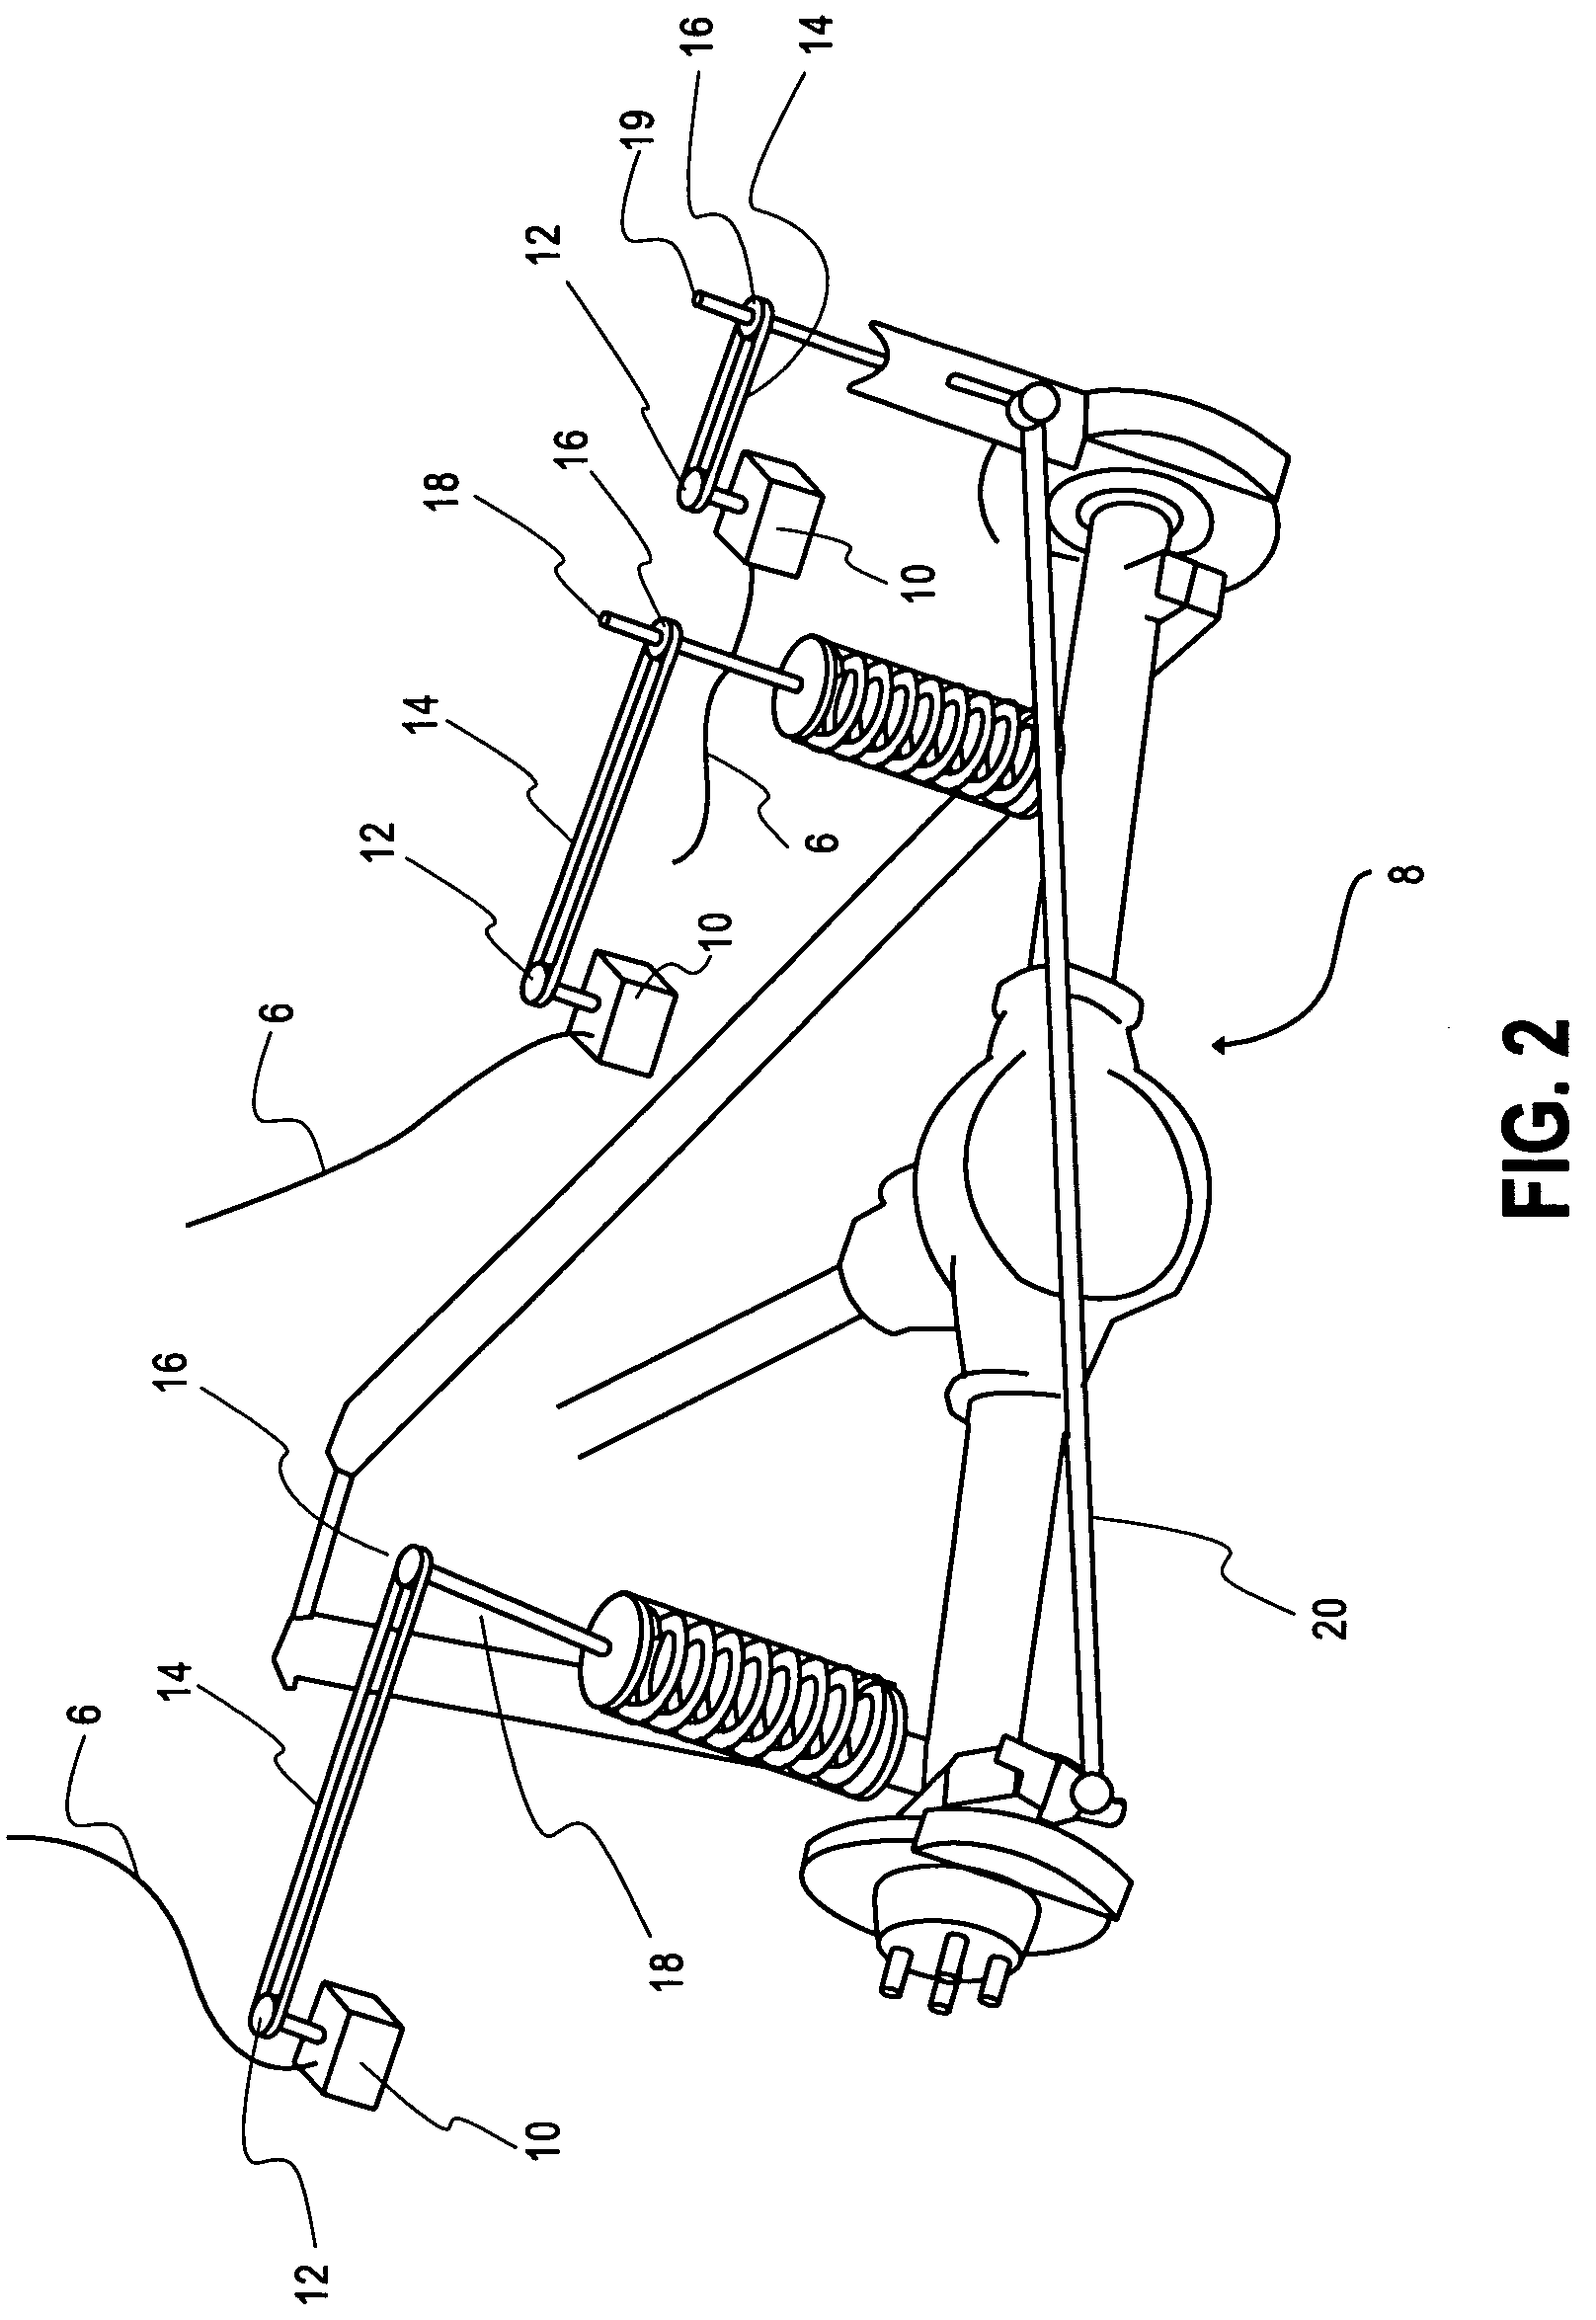 Driver controlled wedge and track bar adjustors